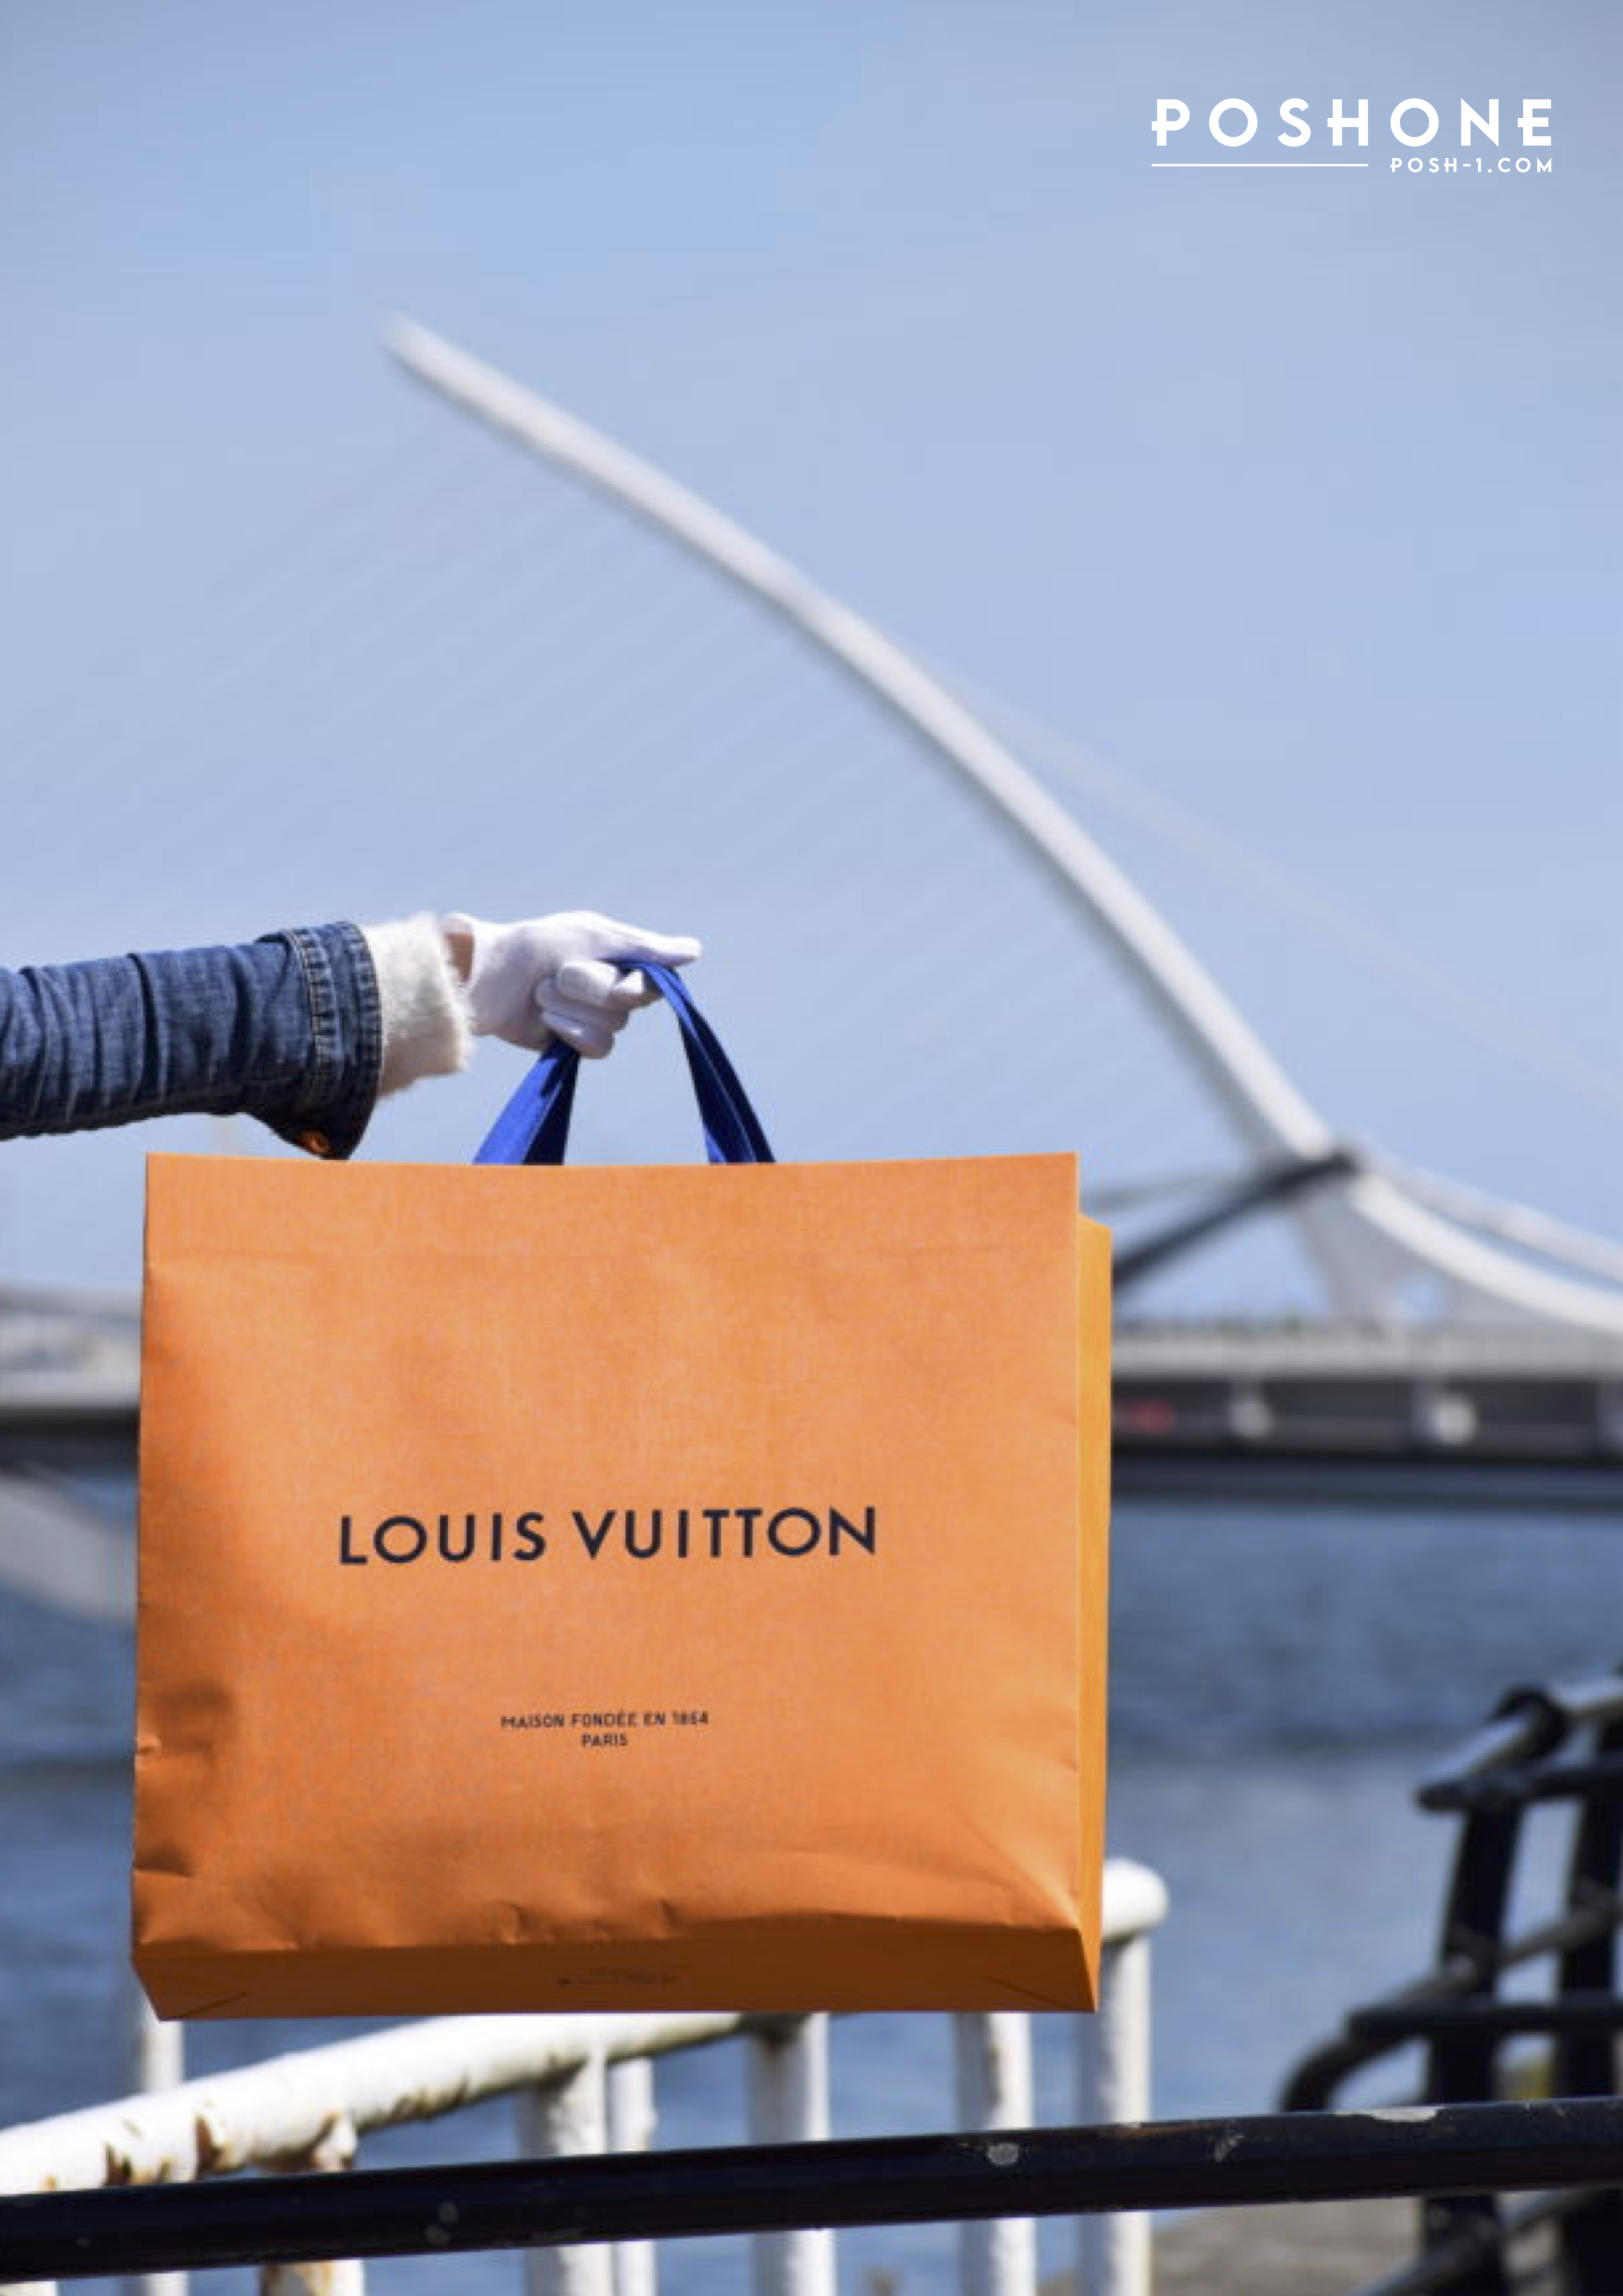 New Louis Vuitton Bags 2021 Airplane Crashed